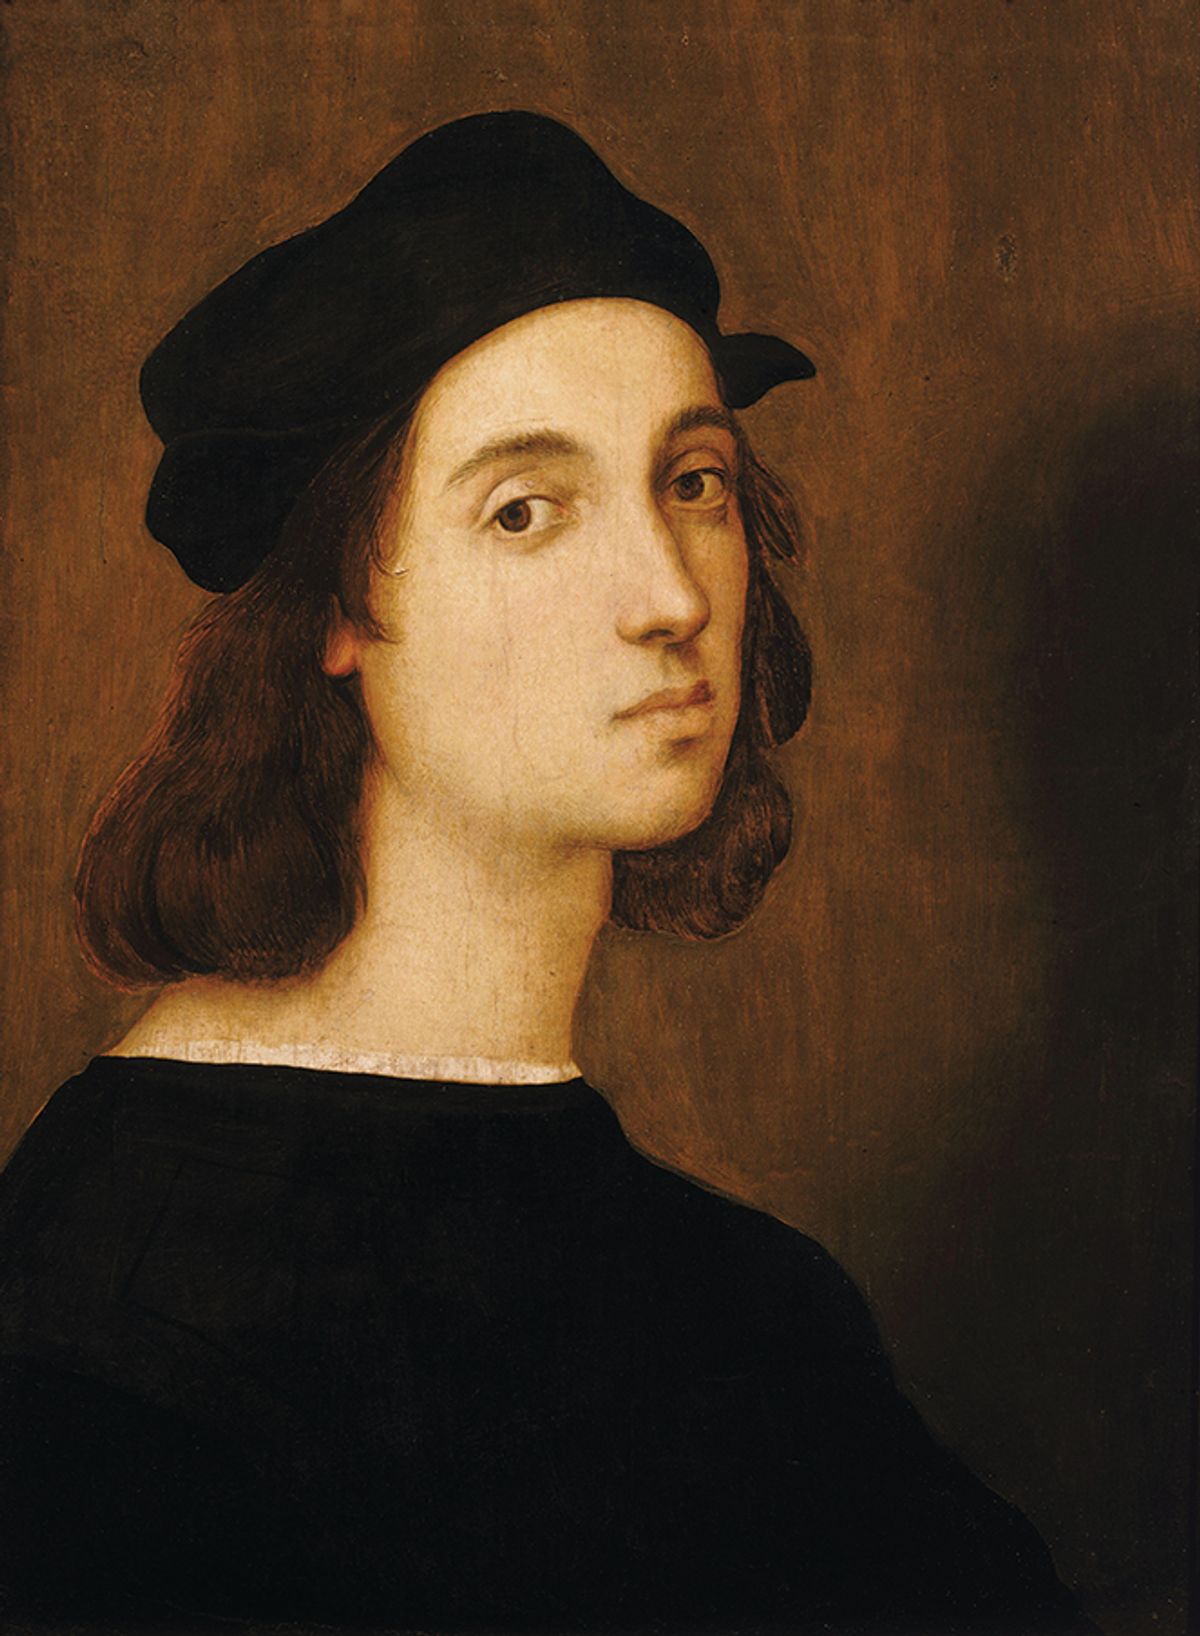 A self-portrait of Raphael in his 20s, painted between 1504 and 1506 Gallerie Degli Uffizi